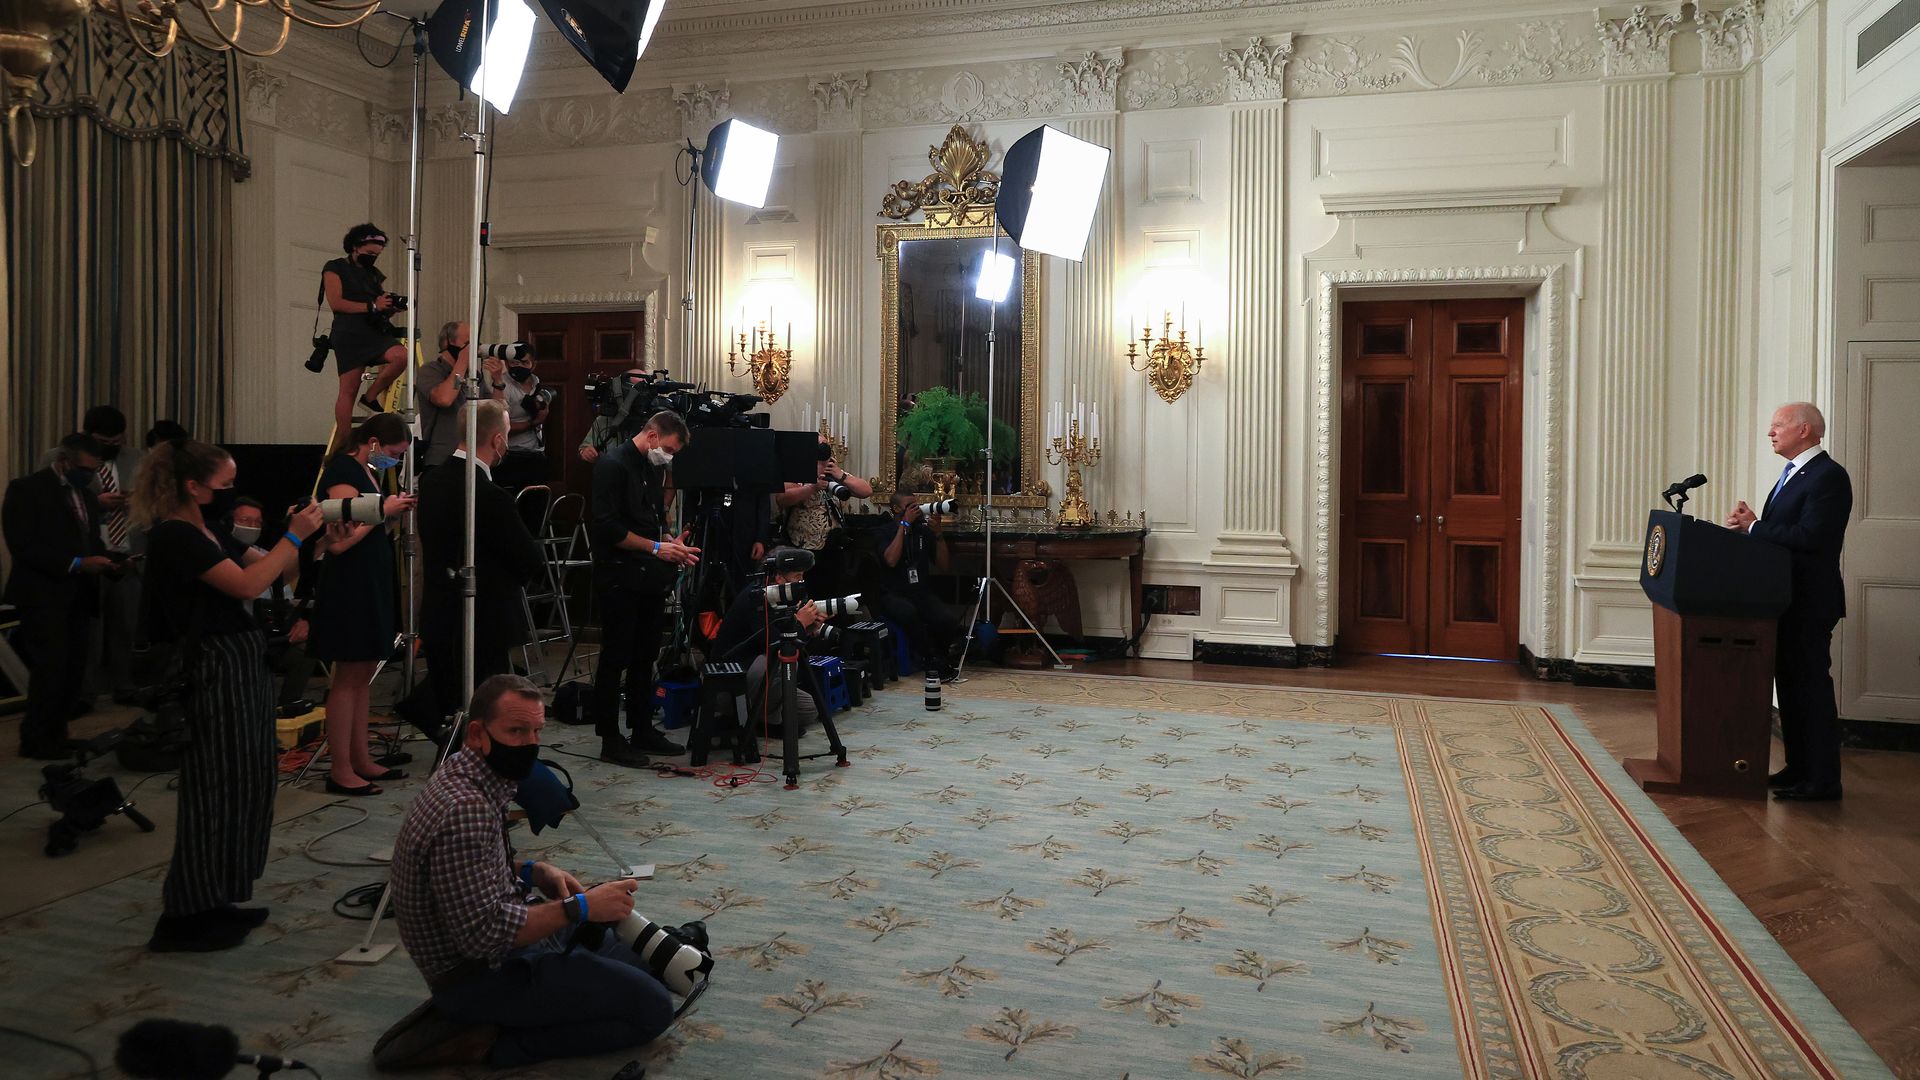 Biden speaks in front of lights and cameras at the White House